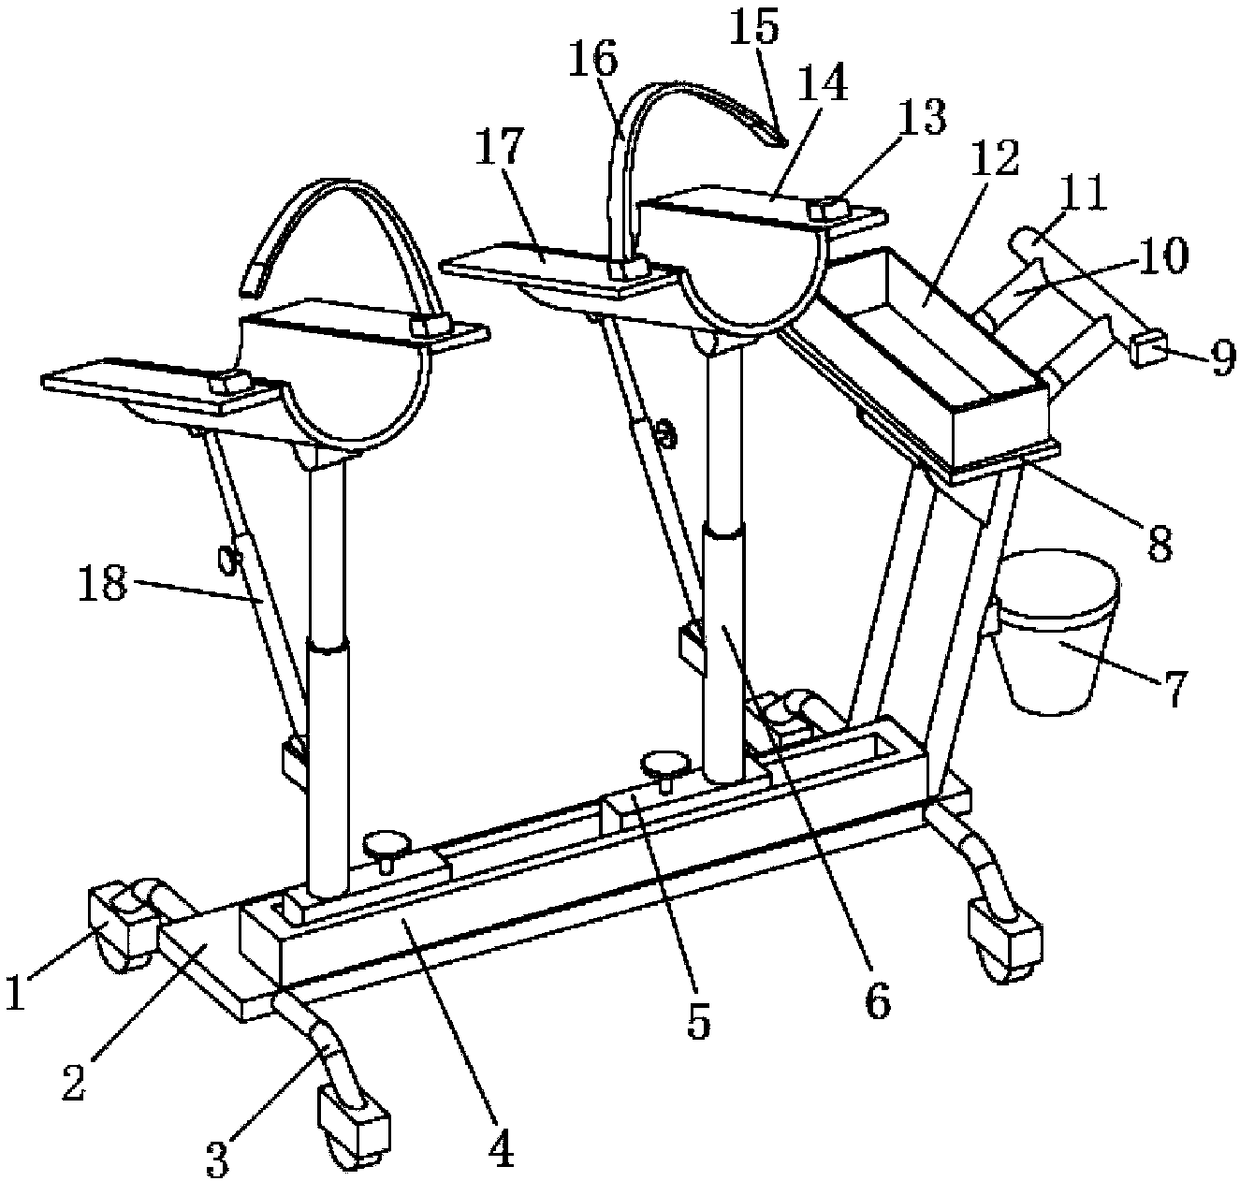 Lower limb supporting adjustable device for obstetrical nursing